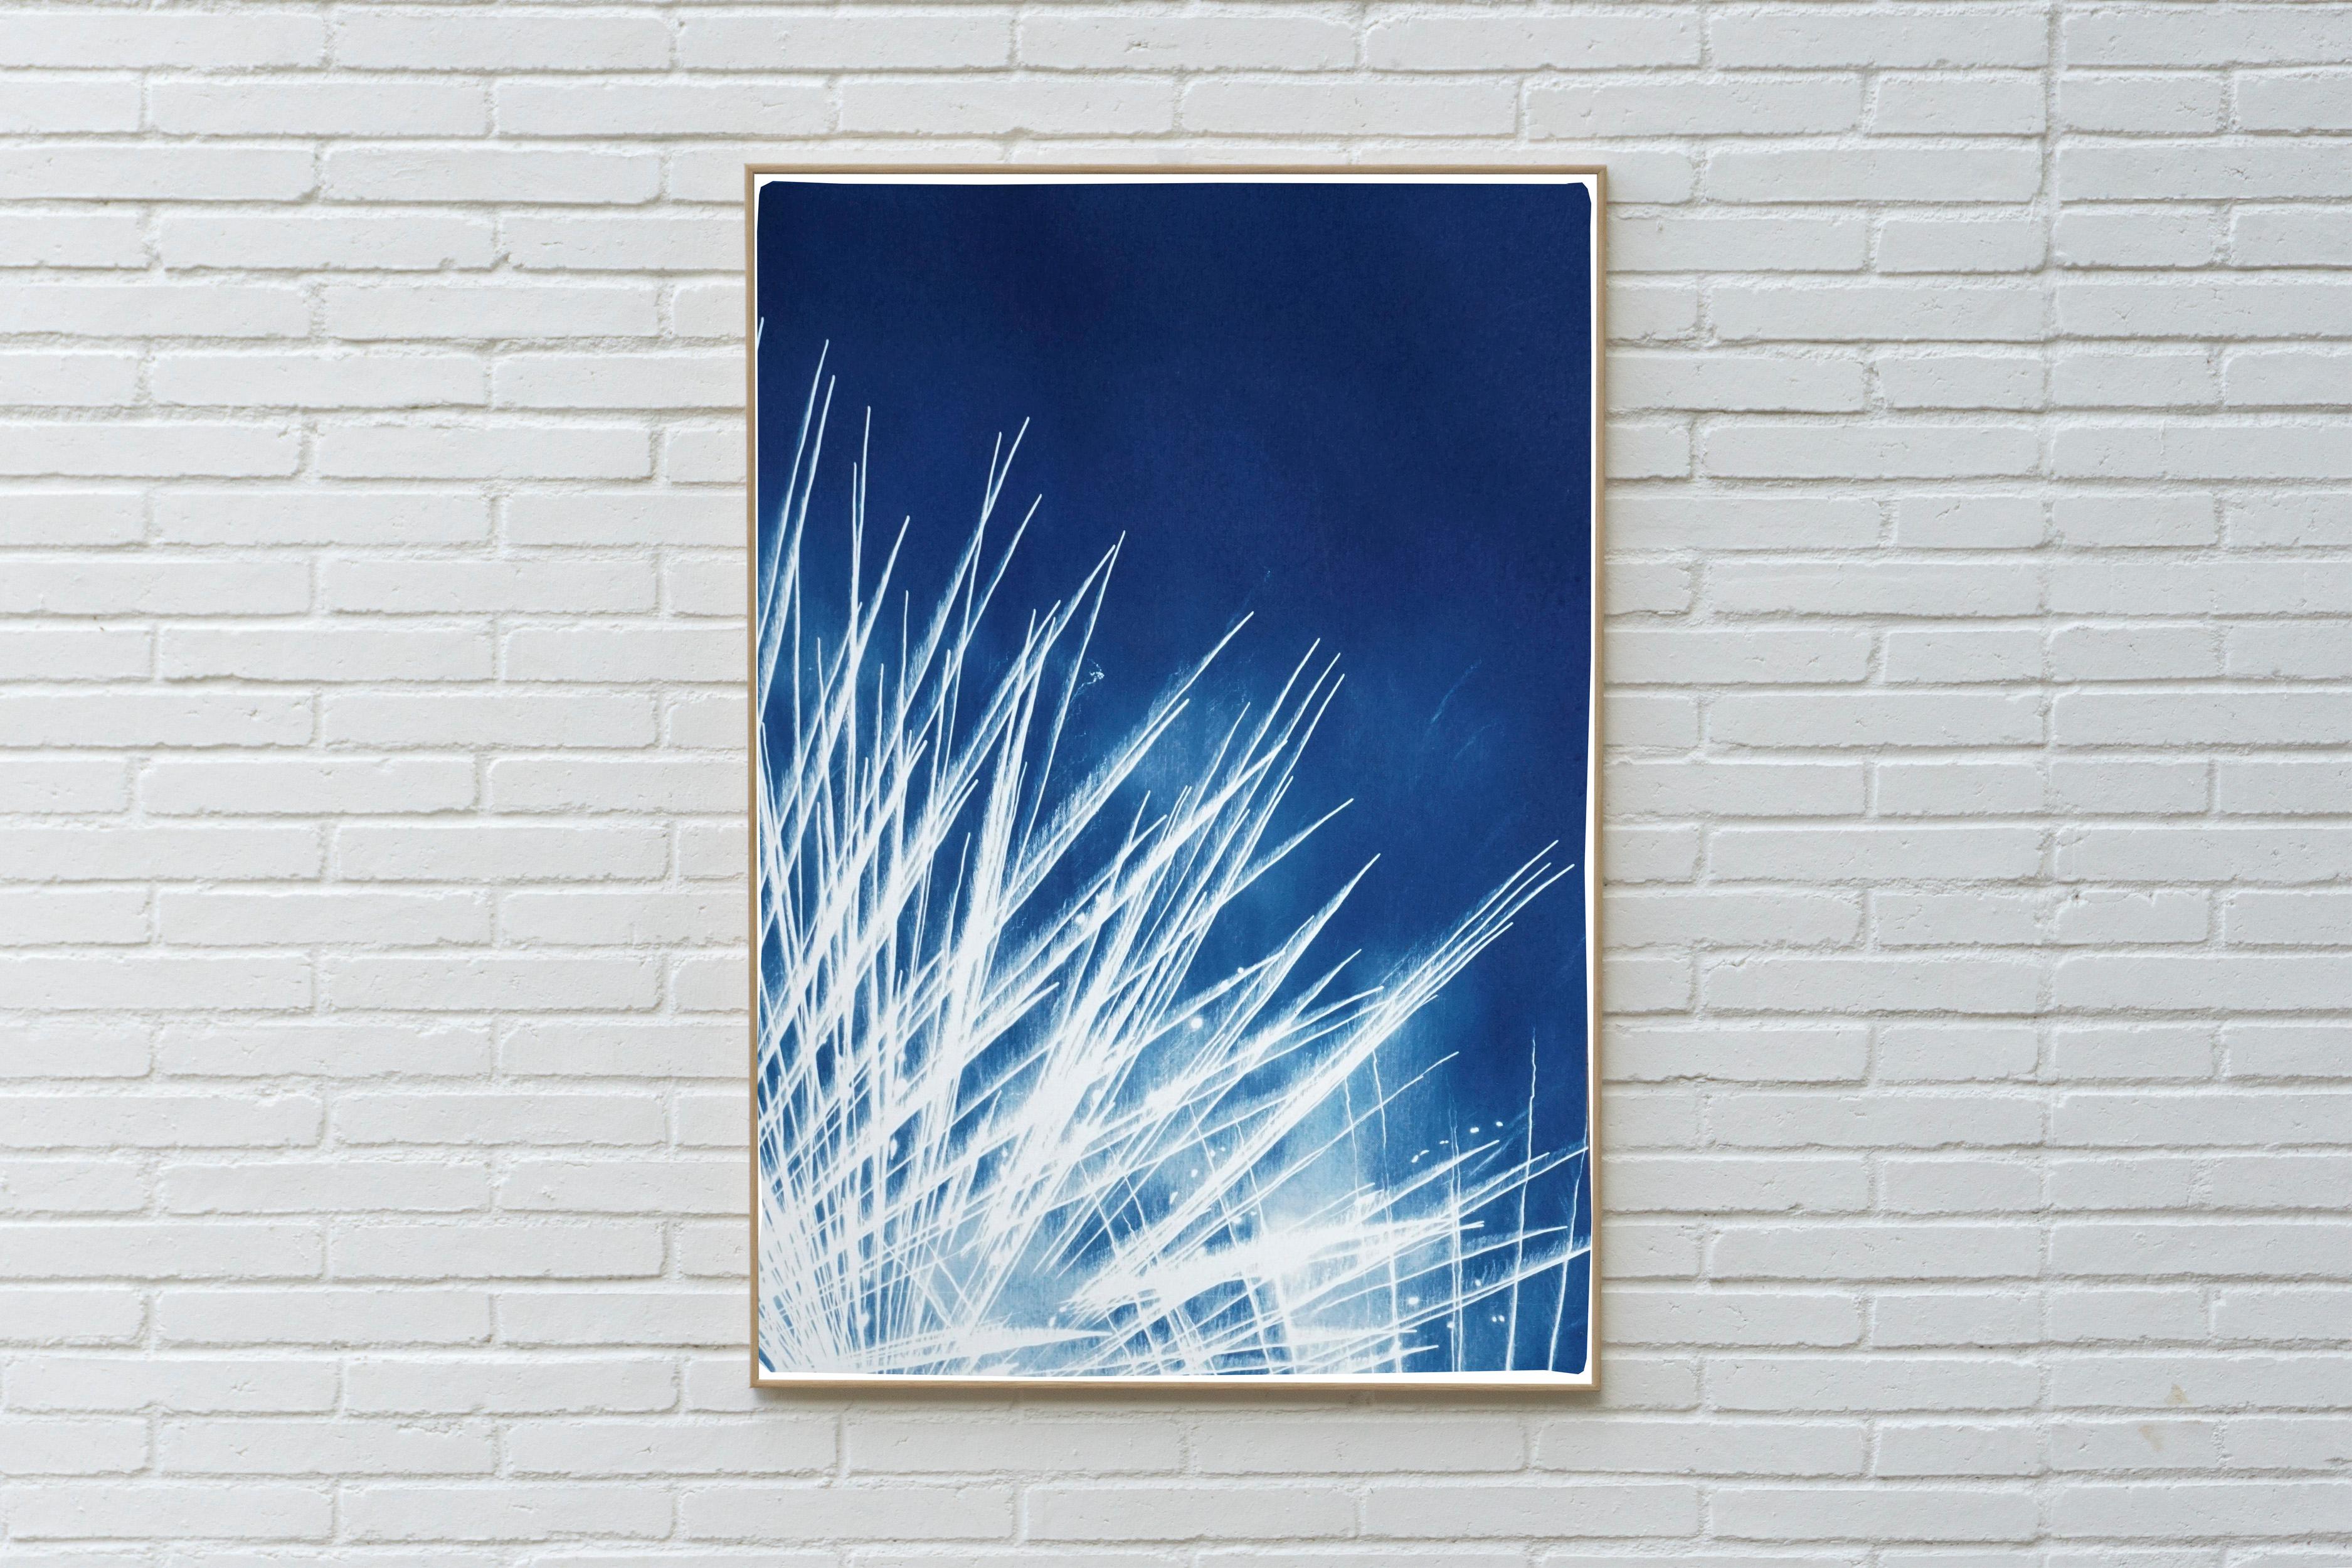 Nighttime Fireworks Flaring, Nocturnal Skyline, Abstract Lights in White & Blue - Painting by Kind of Cyan